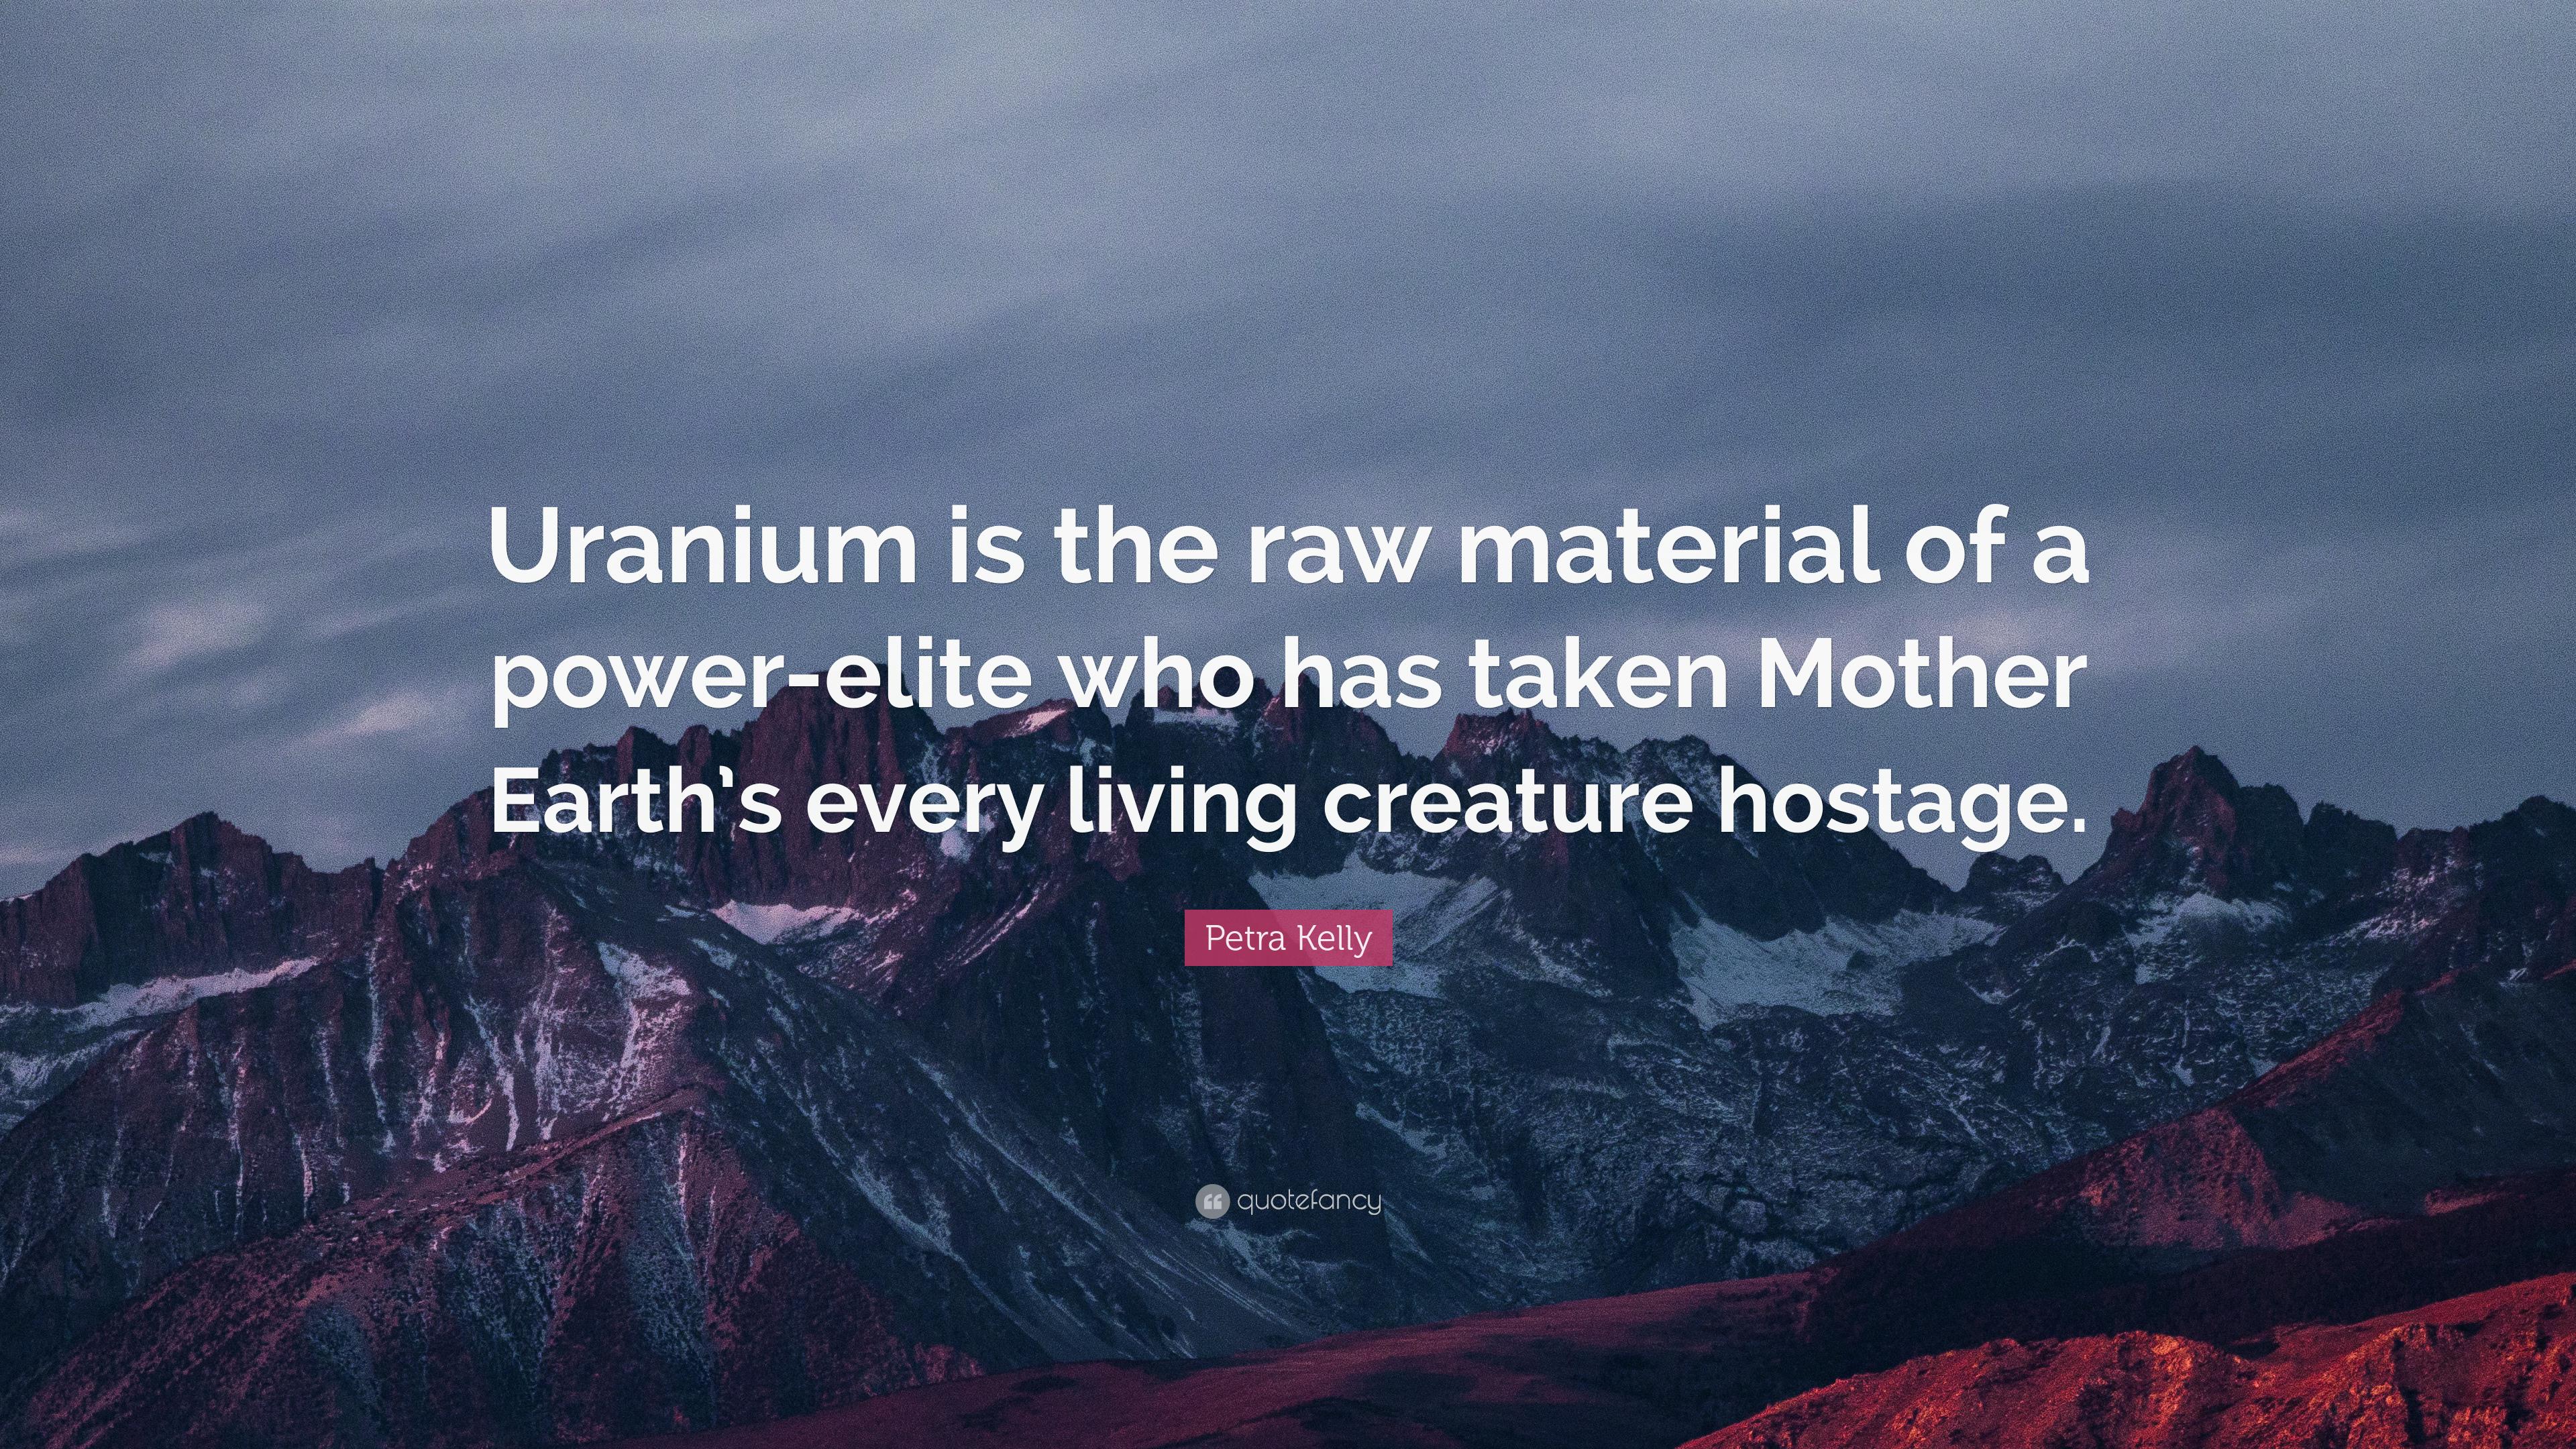 Petra Kelly Quote: “Uranium is the raw material of a power